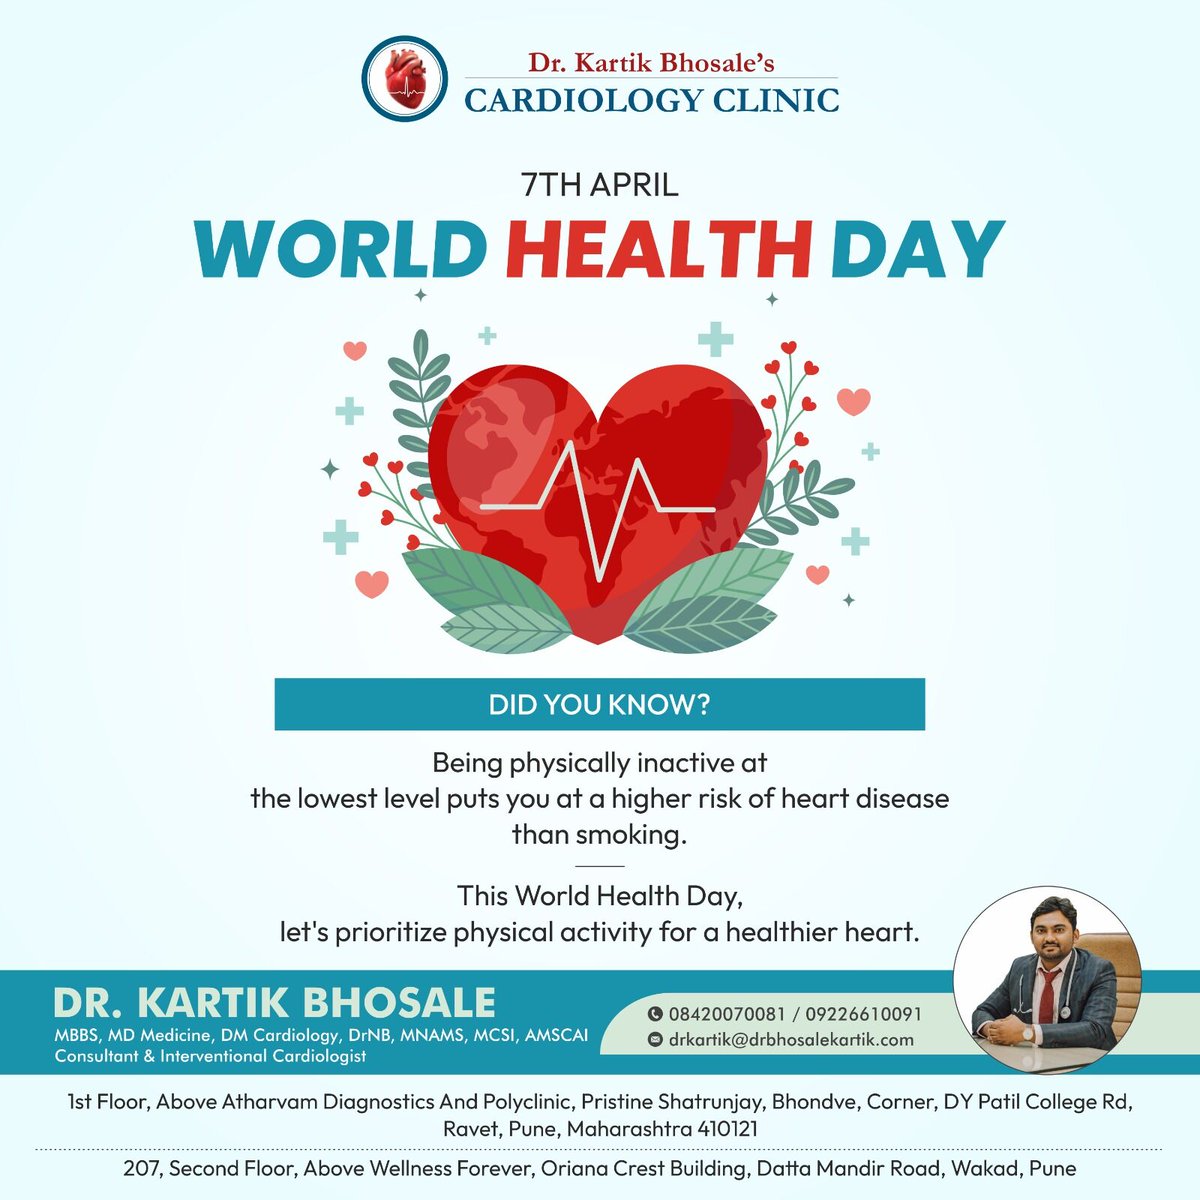 . This World Health Day, let's prioritize physical activity for a healthier heart. Join us on 7th April to celebrate #WorldHealthDay and take a step towards a healthier future! 🌍💪

#drkartikbhosale #cardiologist  #physicalinactivityrisk #heartdiseaserisk #pune #pcmc #wakad